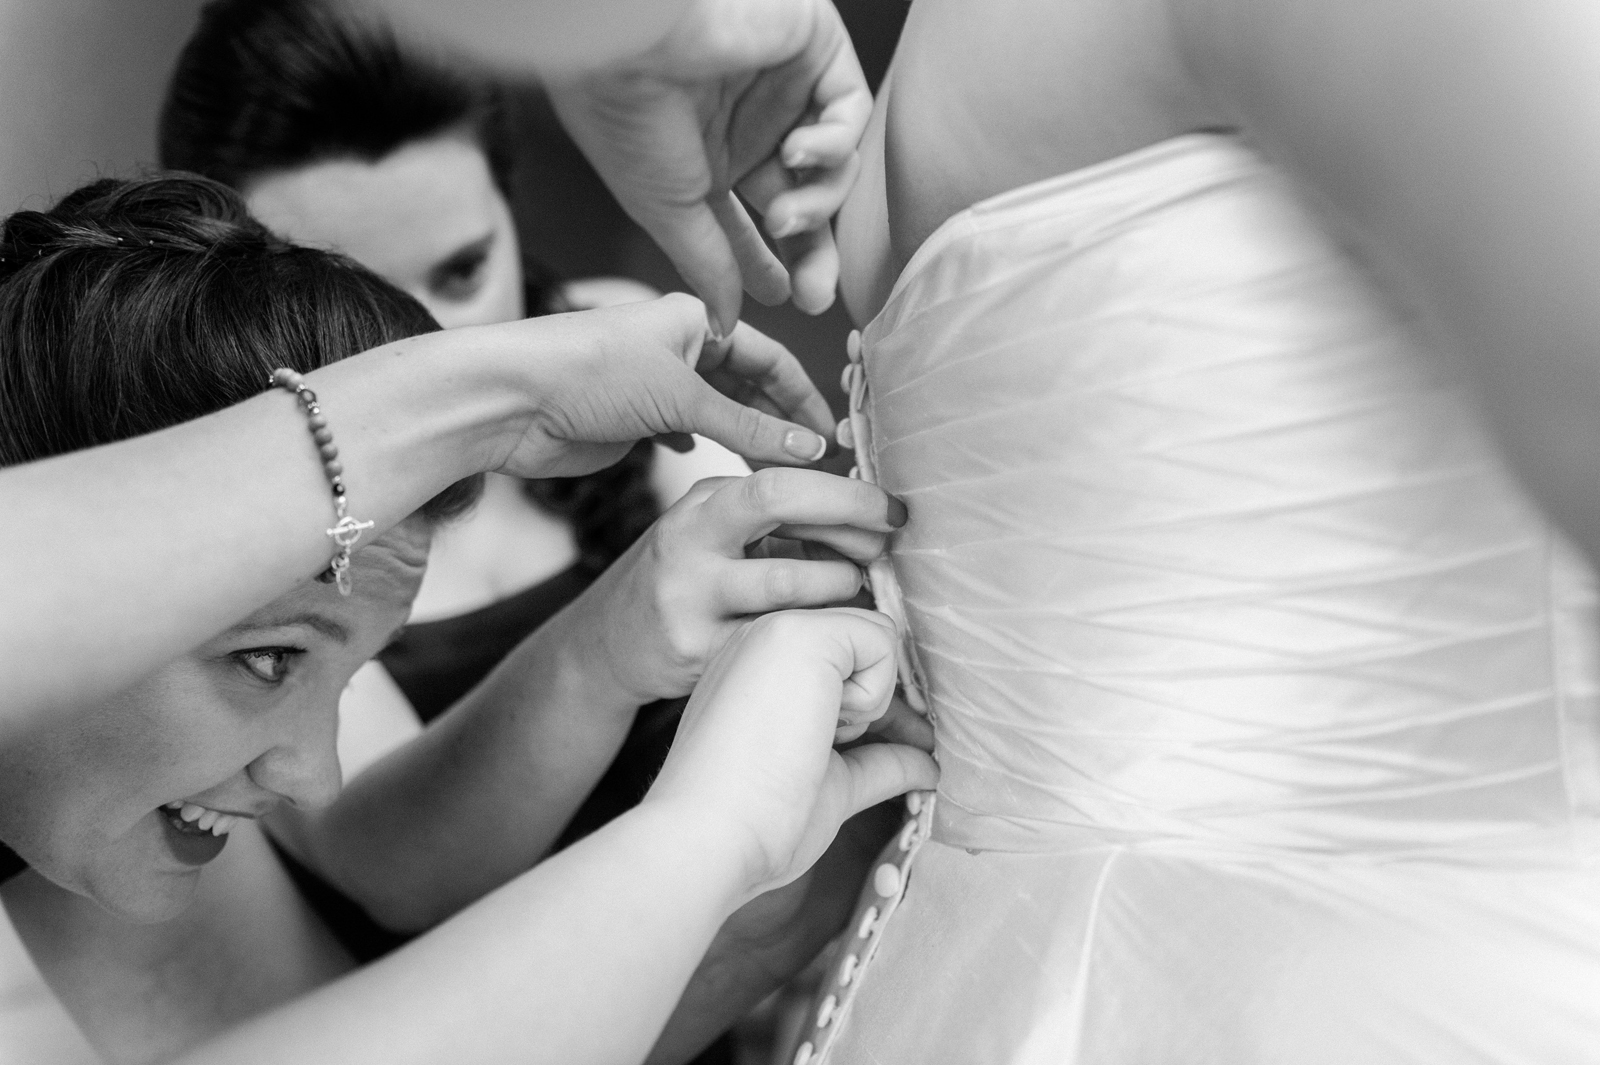 Bridesmaids working together to buttoning up wedding dress